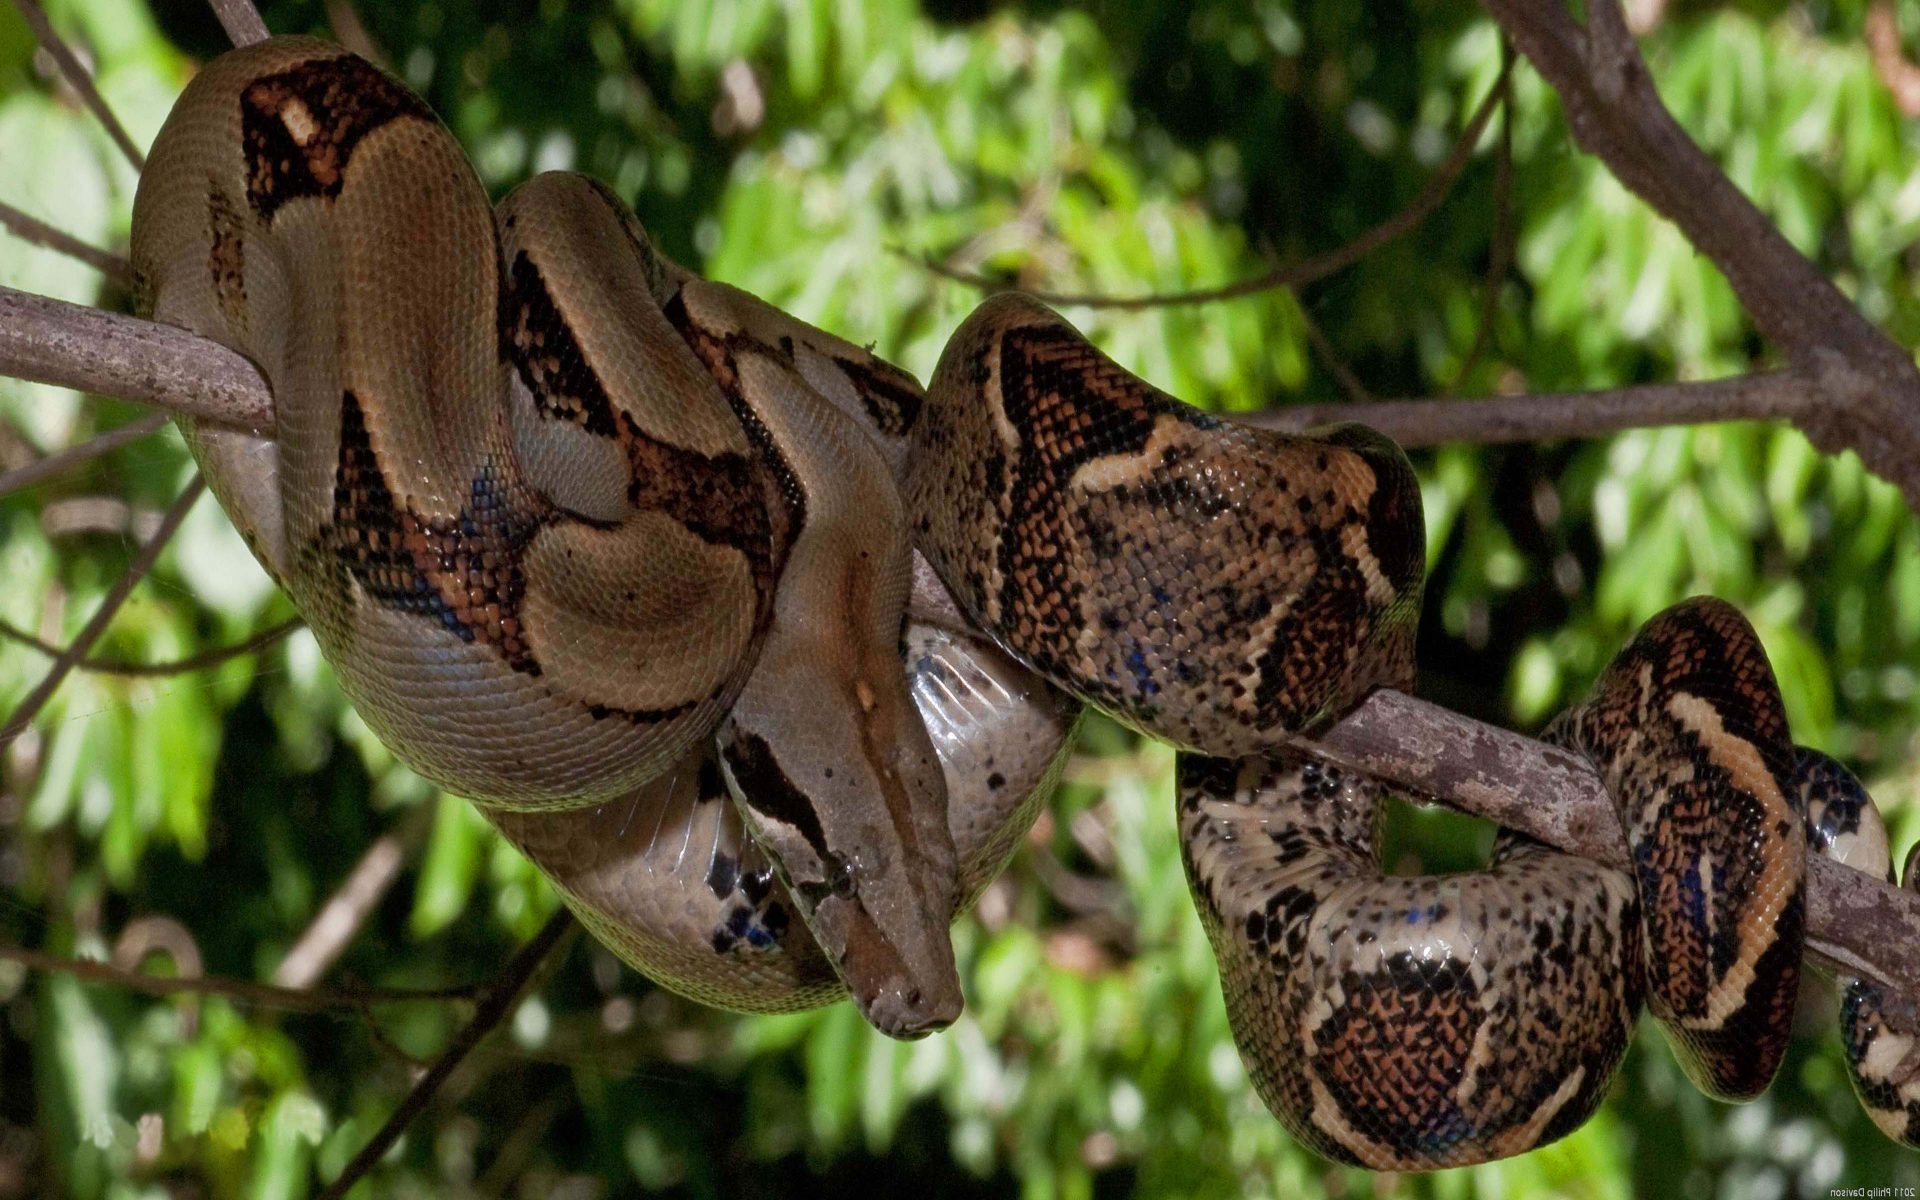 Boa Constrictor Or Red Tail Boa Kind Of Big Snake Heavy - Caribbean Wildlife South America , HD Wallpaper & Backgrounds